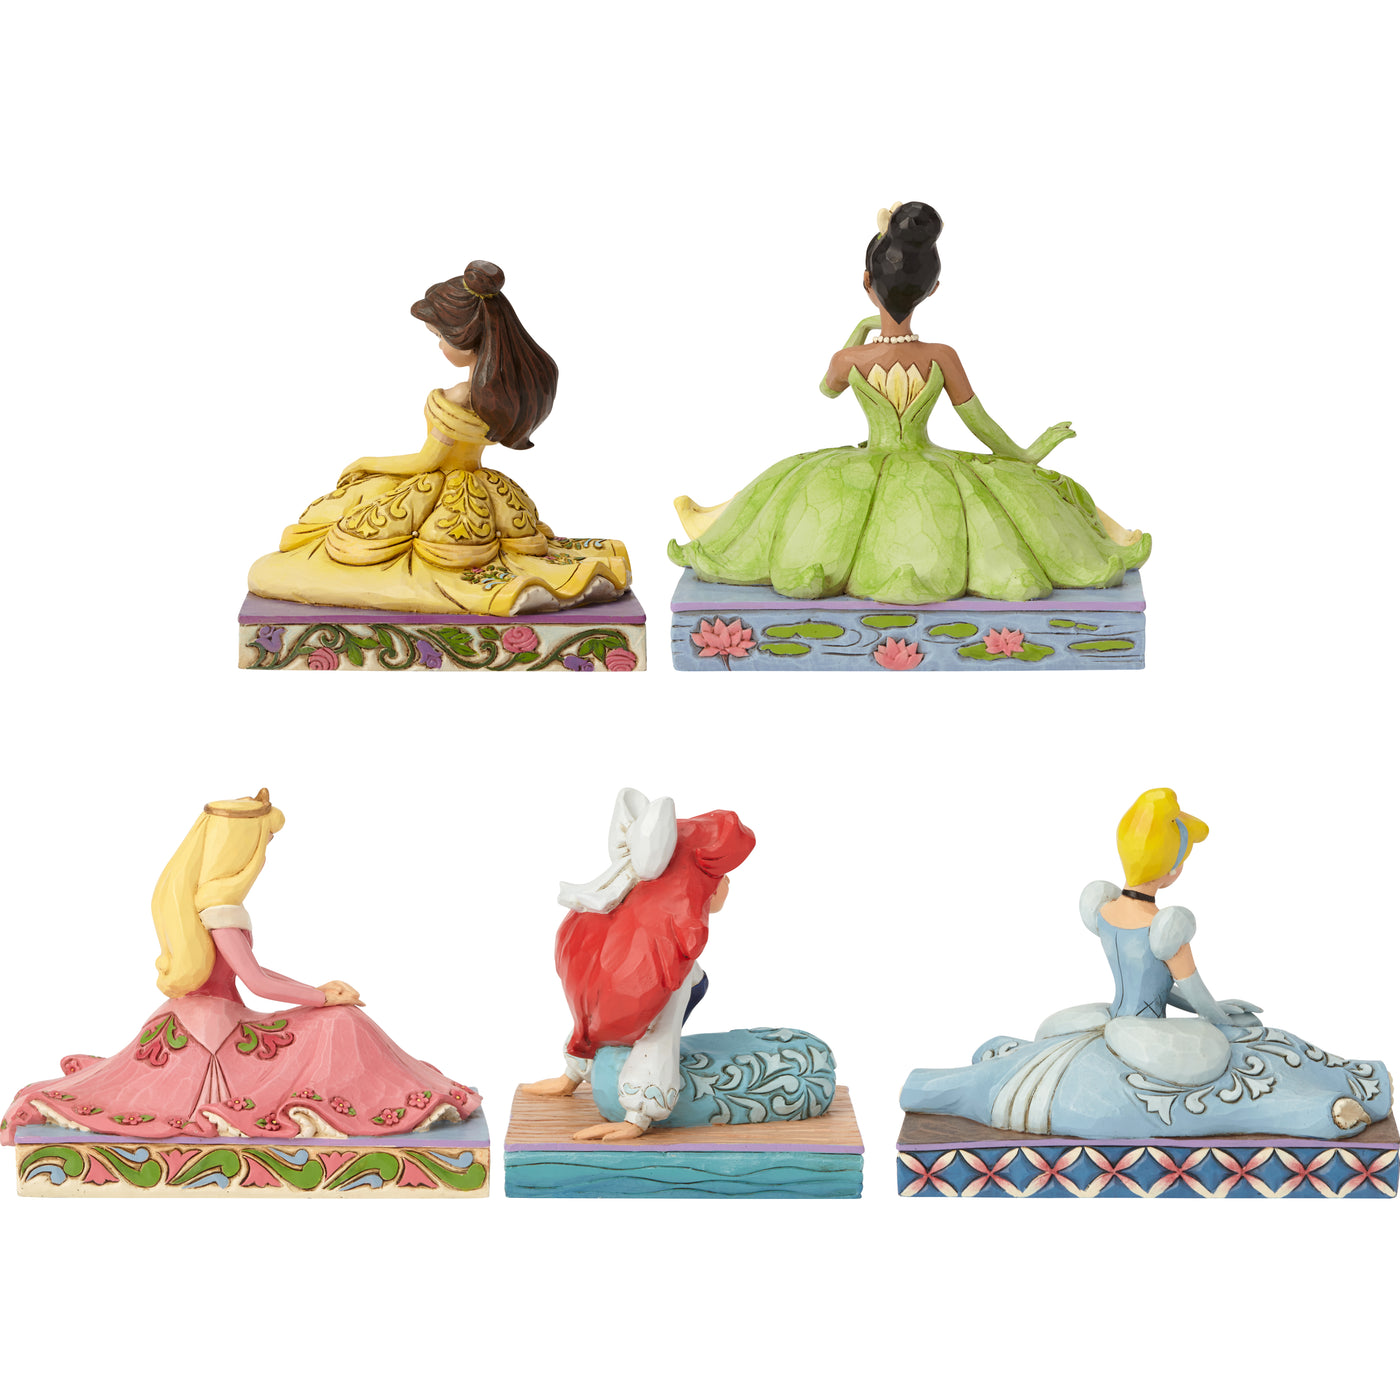 Ariel Be Bold, Aurora Be True, Tiana Be Independent, Cinderella Be Charming & Belle Be Kind